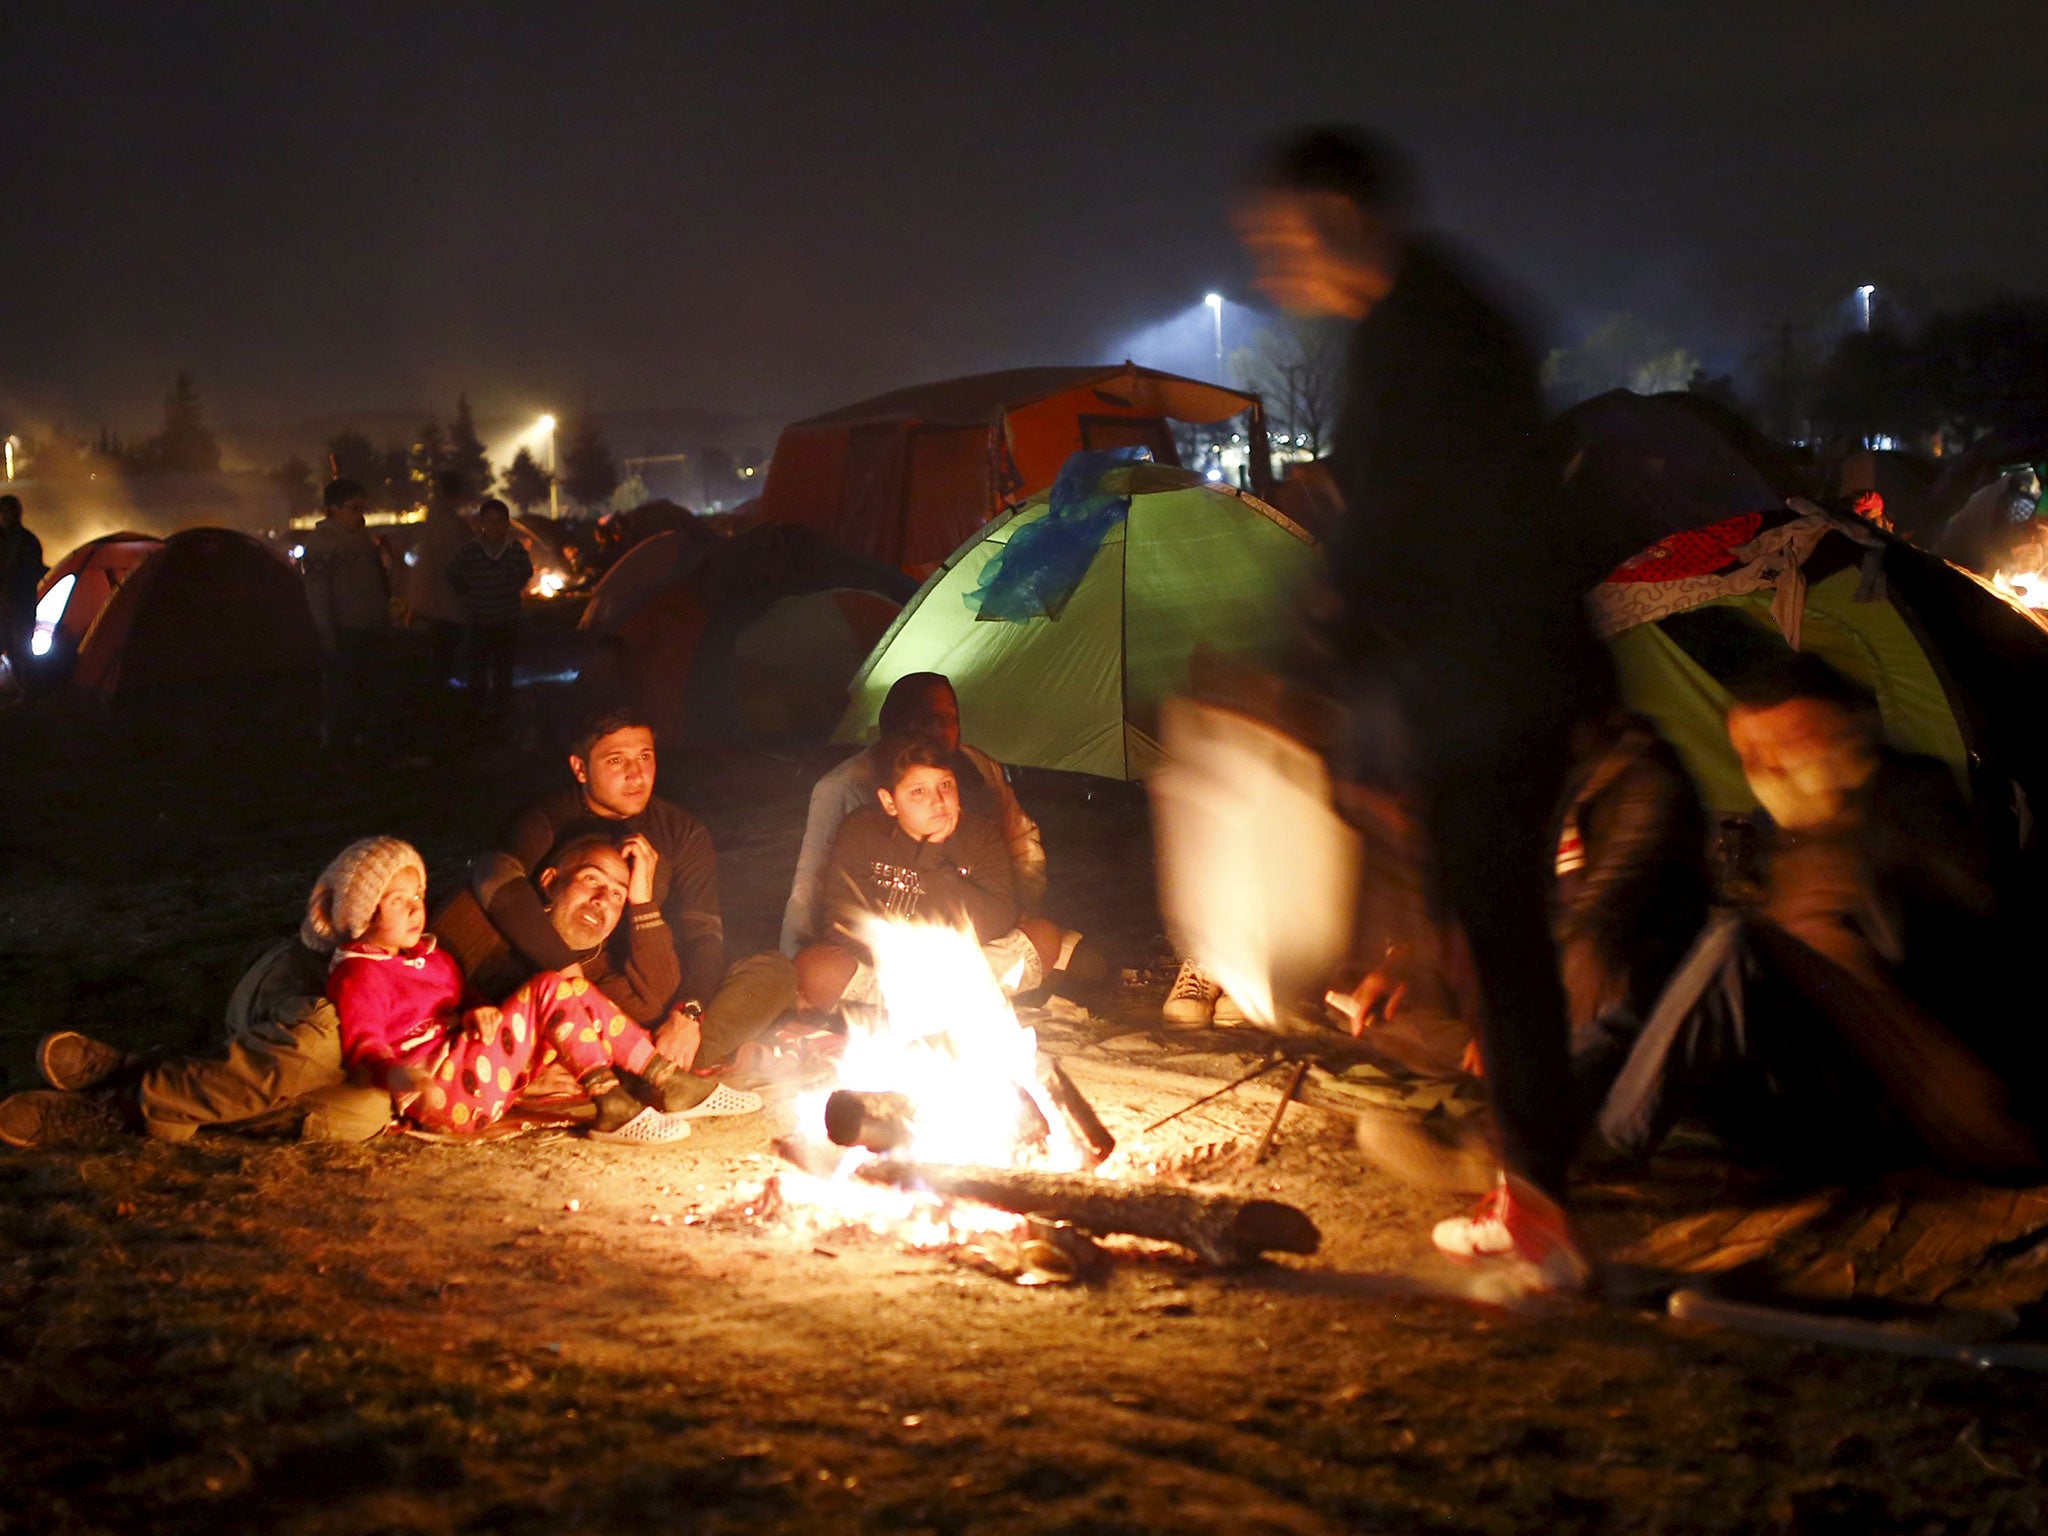 Migrants waiting to cross the Greek-Macedonian border warm themselves by a fire next to tents near the village of Idomeni, Greece